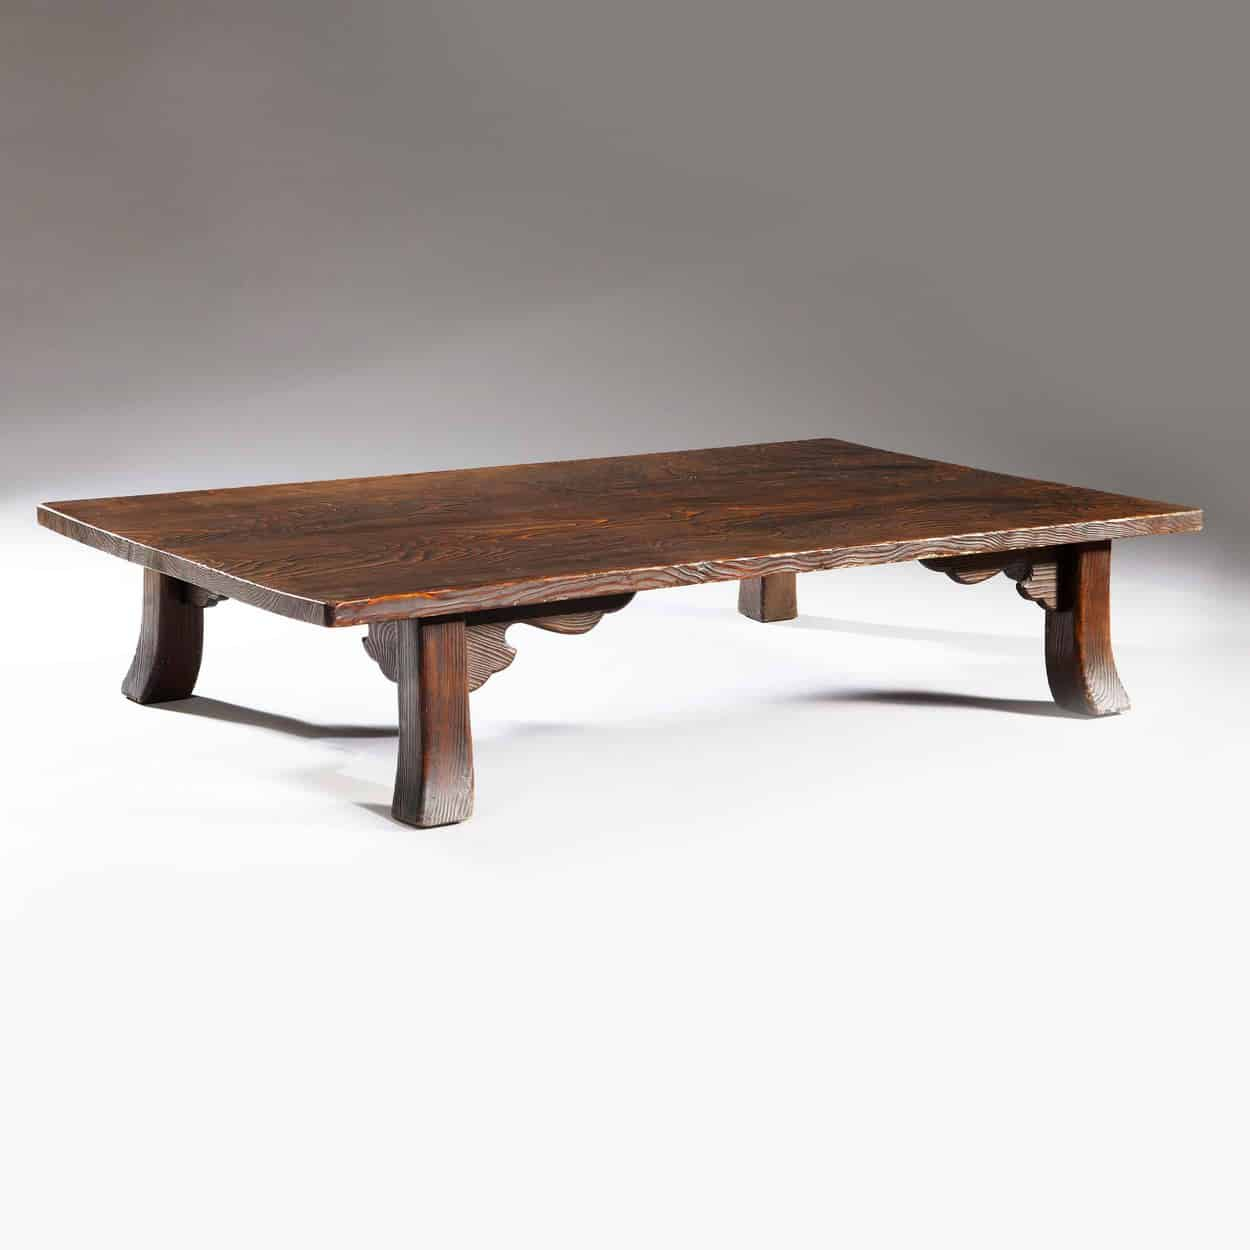 Unique Japanese Low Table Shou Sugi Ban Cedar Wood Coffee Table for dimensions 1250 X 1250